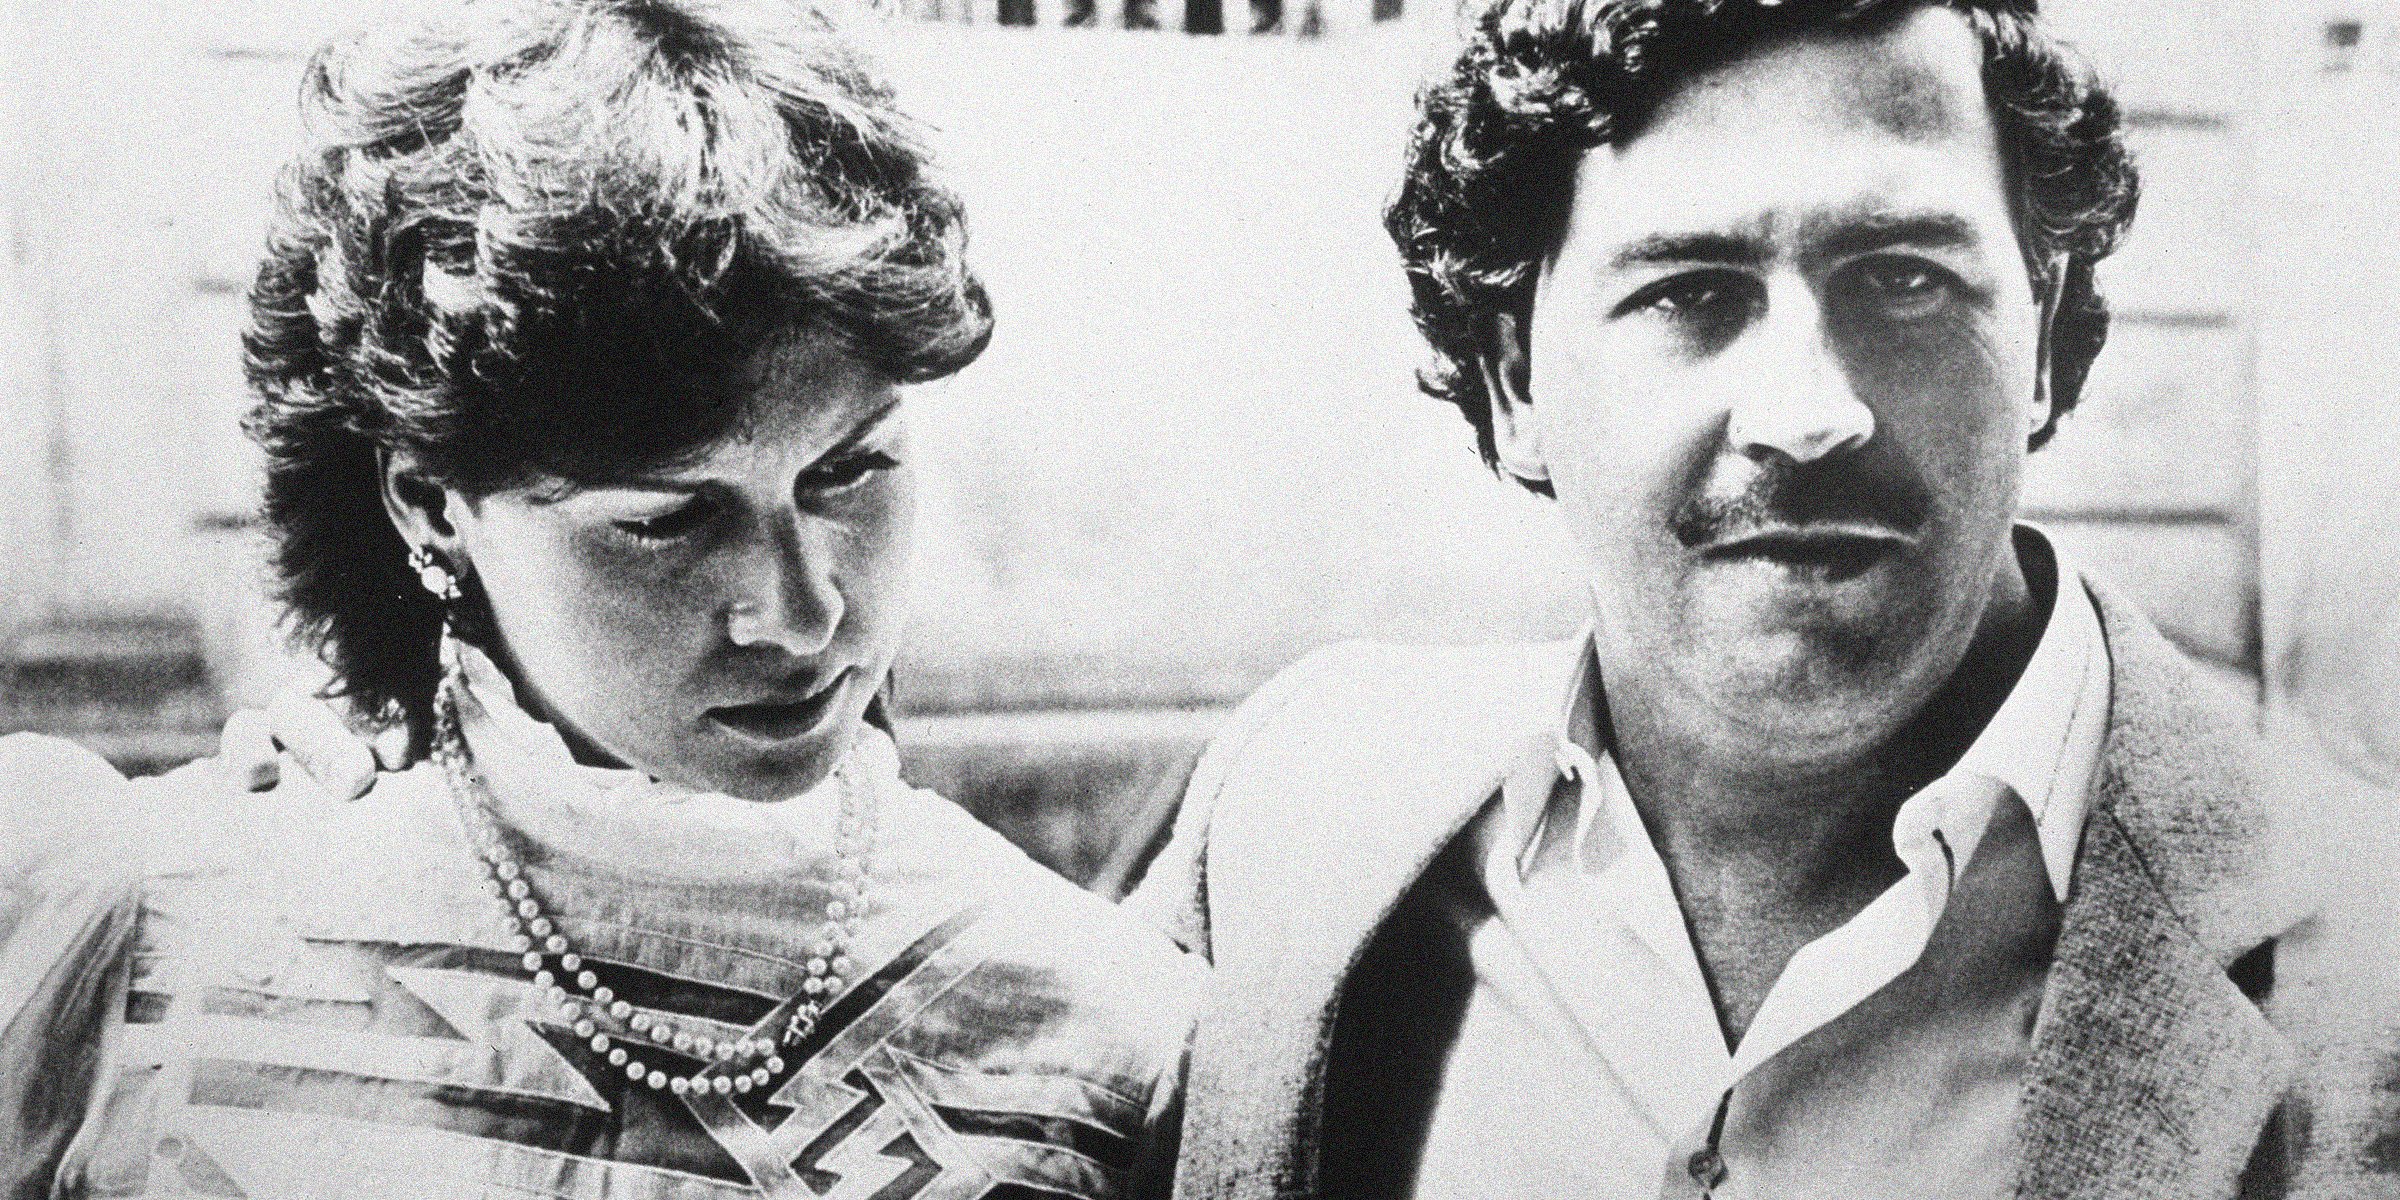 Maria Victoria Henao and Pablo Escobar | Source: Getty Images